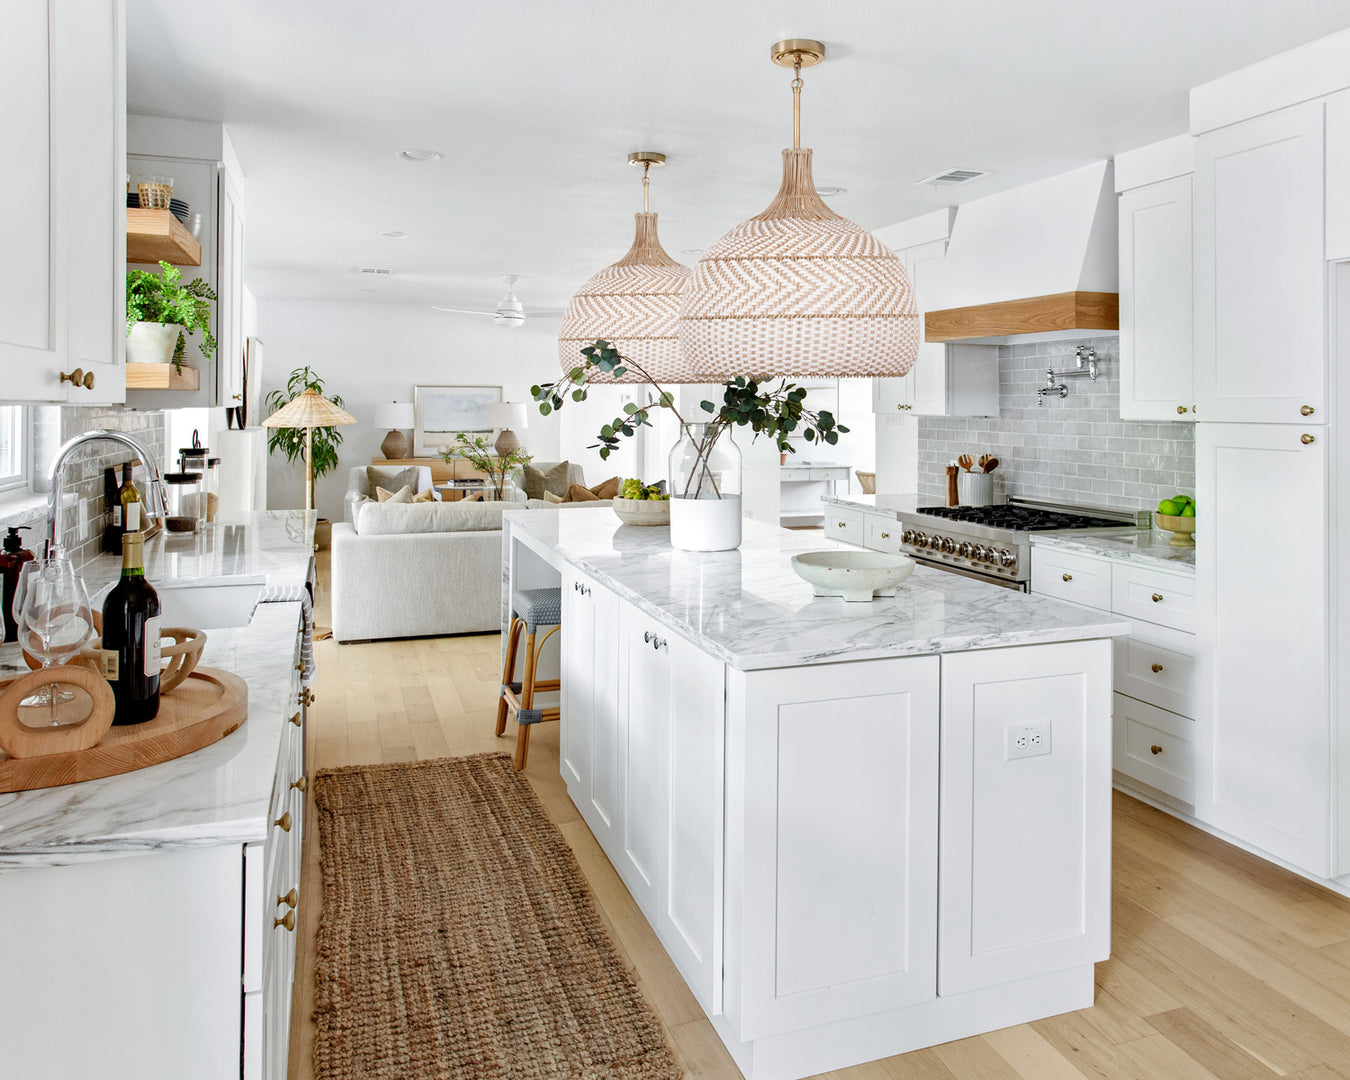 Natural & Organic Style Lighting Fixtures showcased in a Modern Style Kitchen